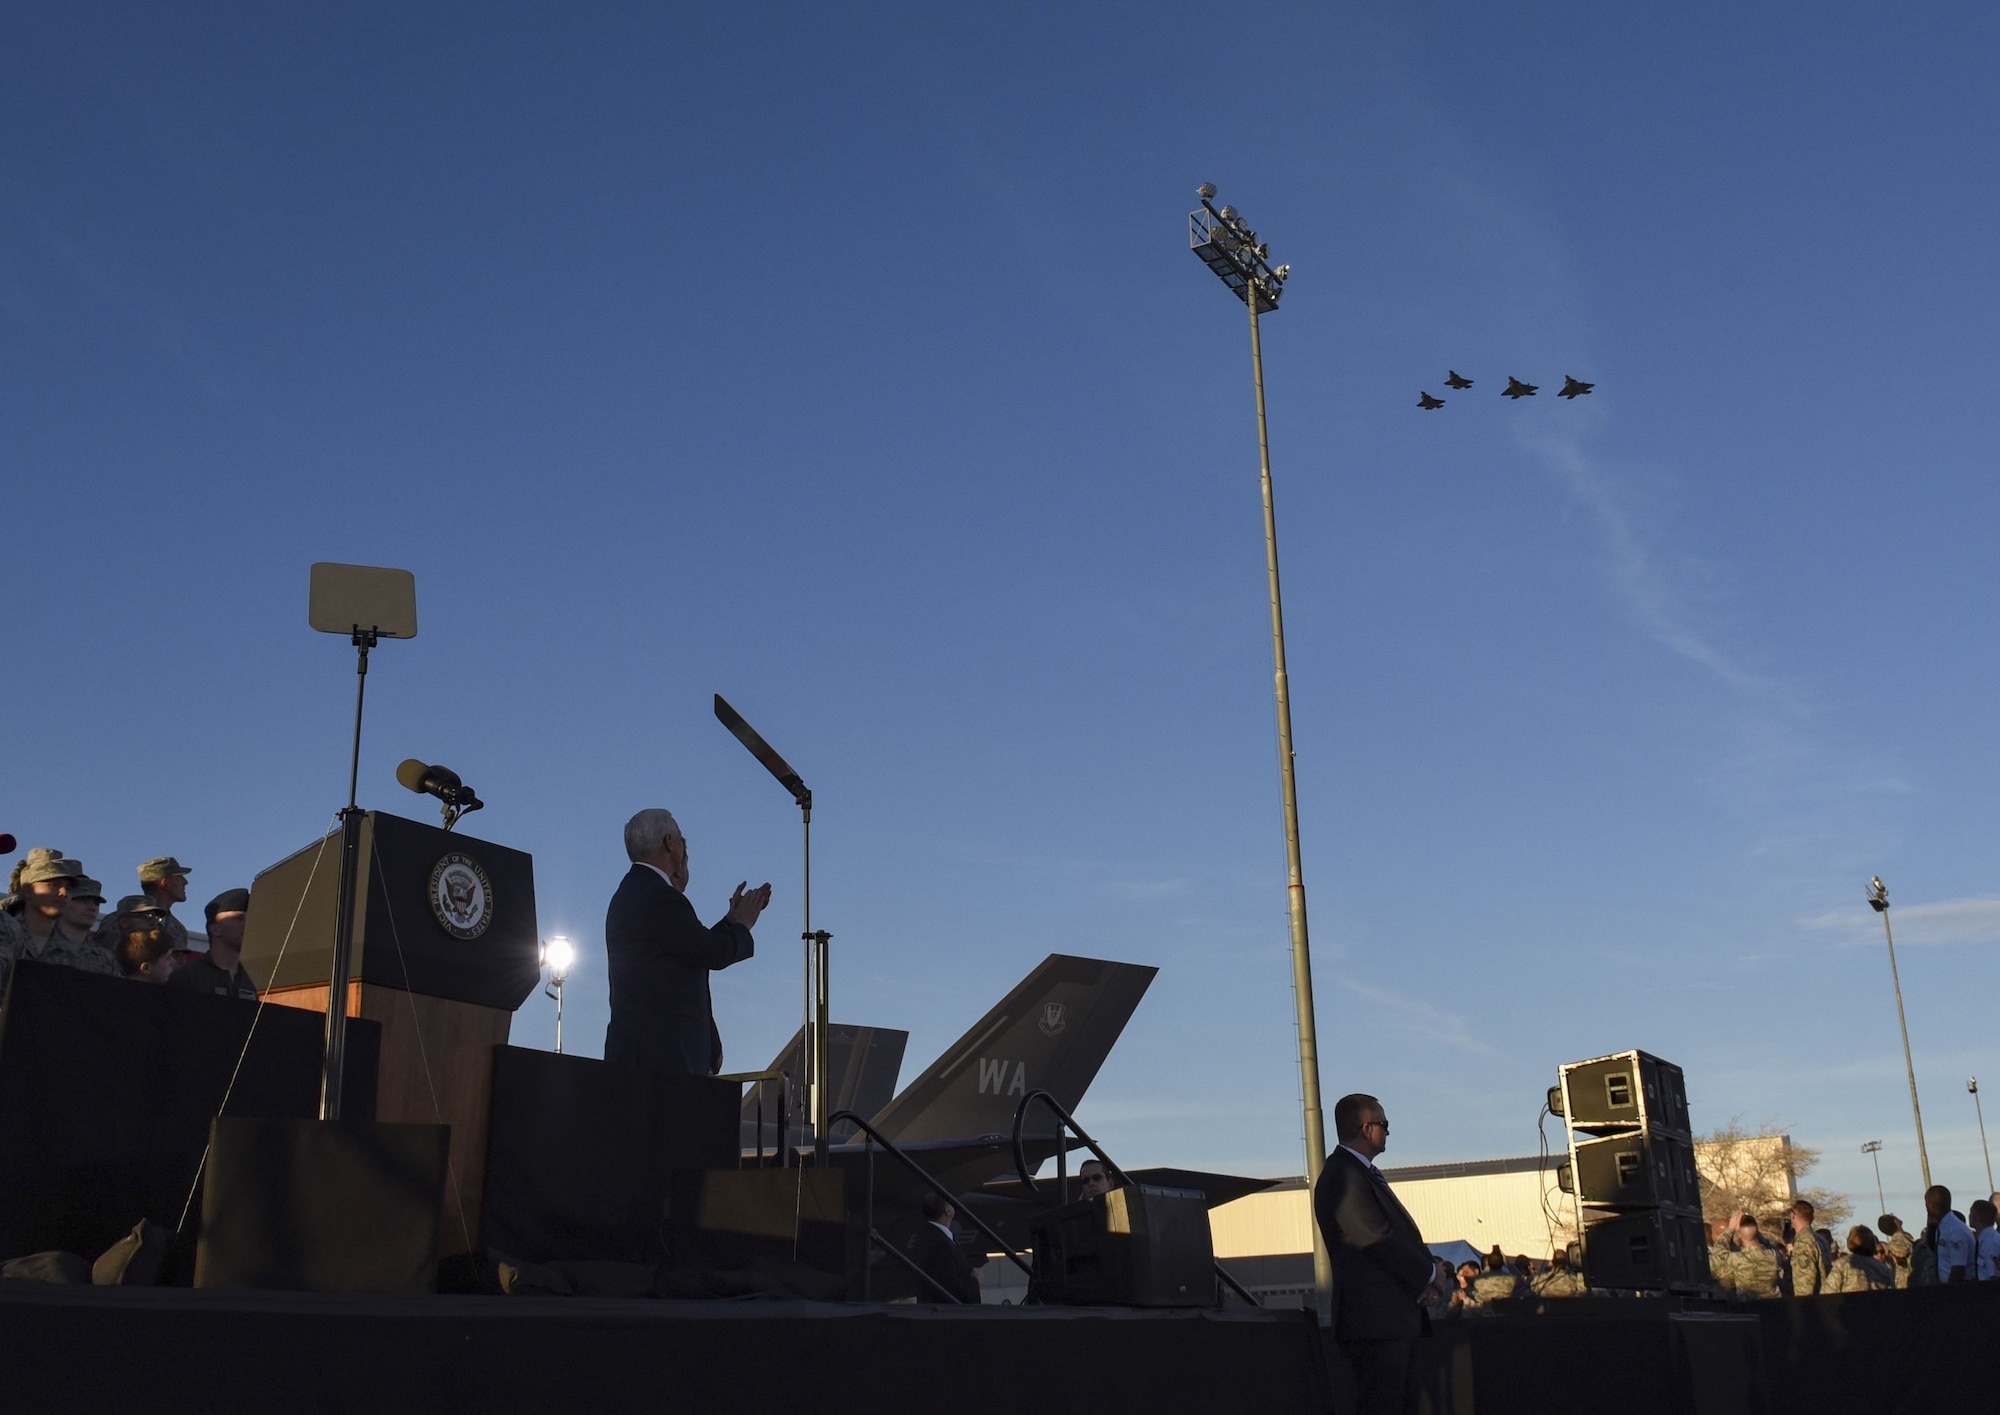 Vice President Mike Pence applauds as two F-35 Lightning II fighter jets, assigned to the 6th Weapons Squadron, and two F-22 Raptor fighter jets, assigned to the 433rd WPS, thunder overhead during his visit at Nellis Air Force Base, Nevada, Jan. 11, 2018. Following the fifth-generation aircraft flyover, Pence turned toward his audience to express his gratitude for a vast history of air superiority. (U.S. Air Force photo by Airman 1st Class Andrew Sarver)